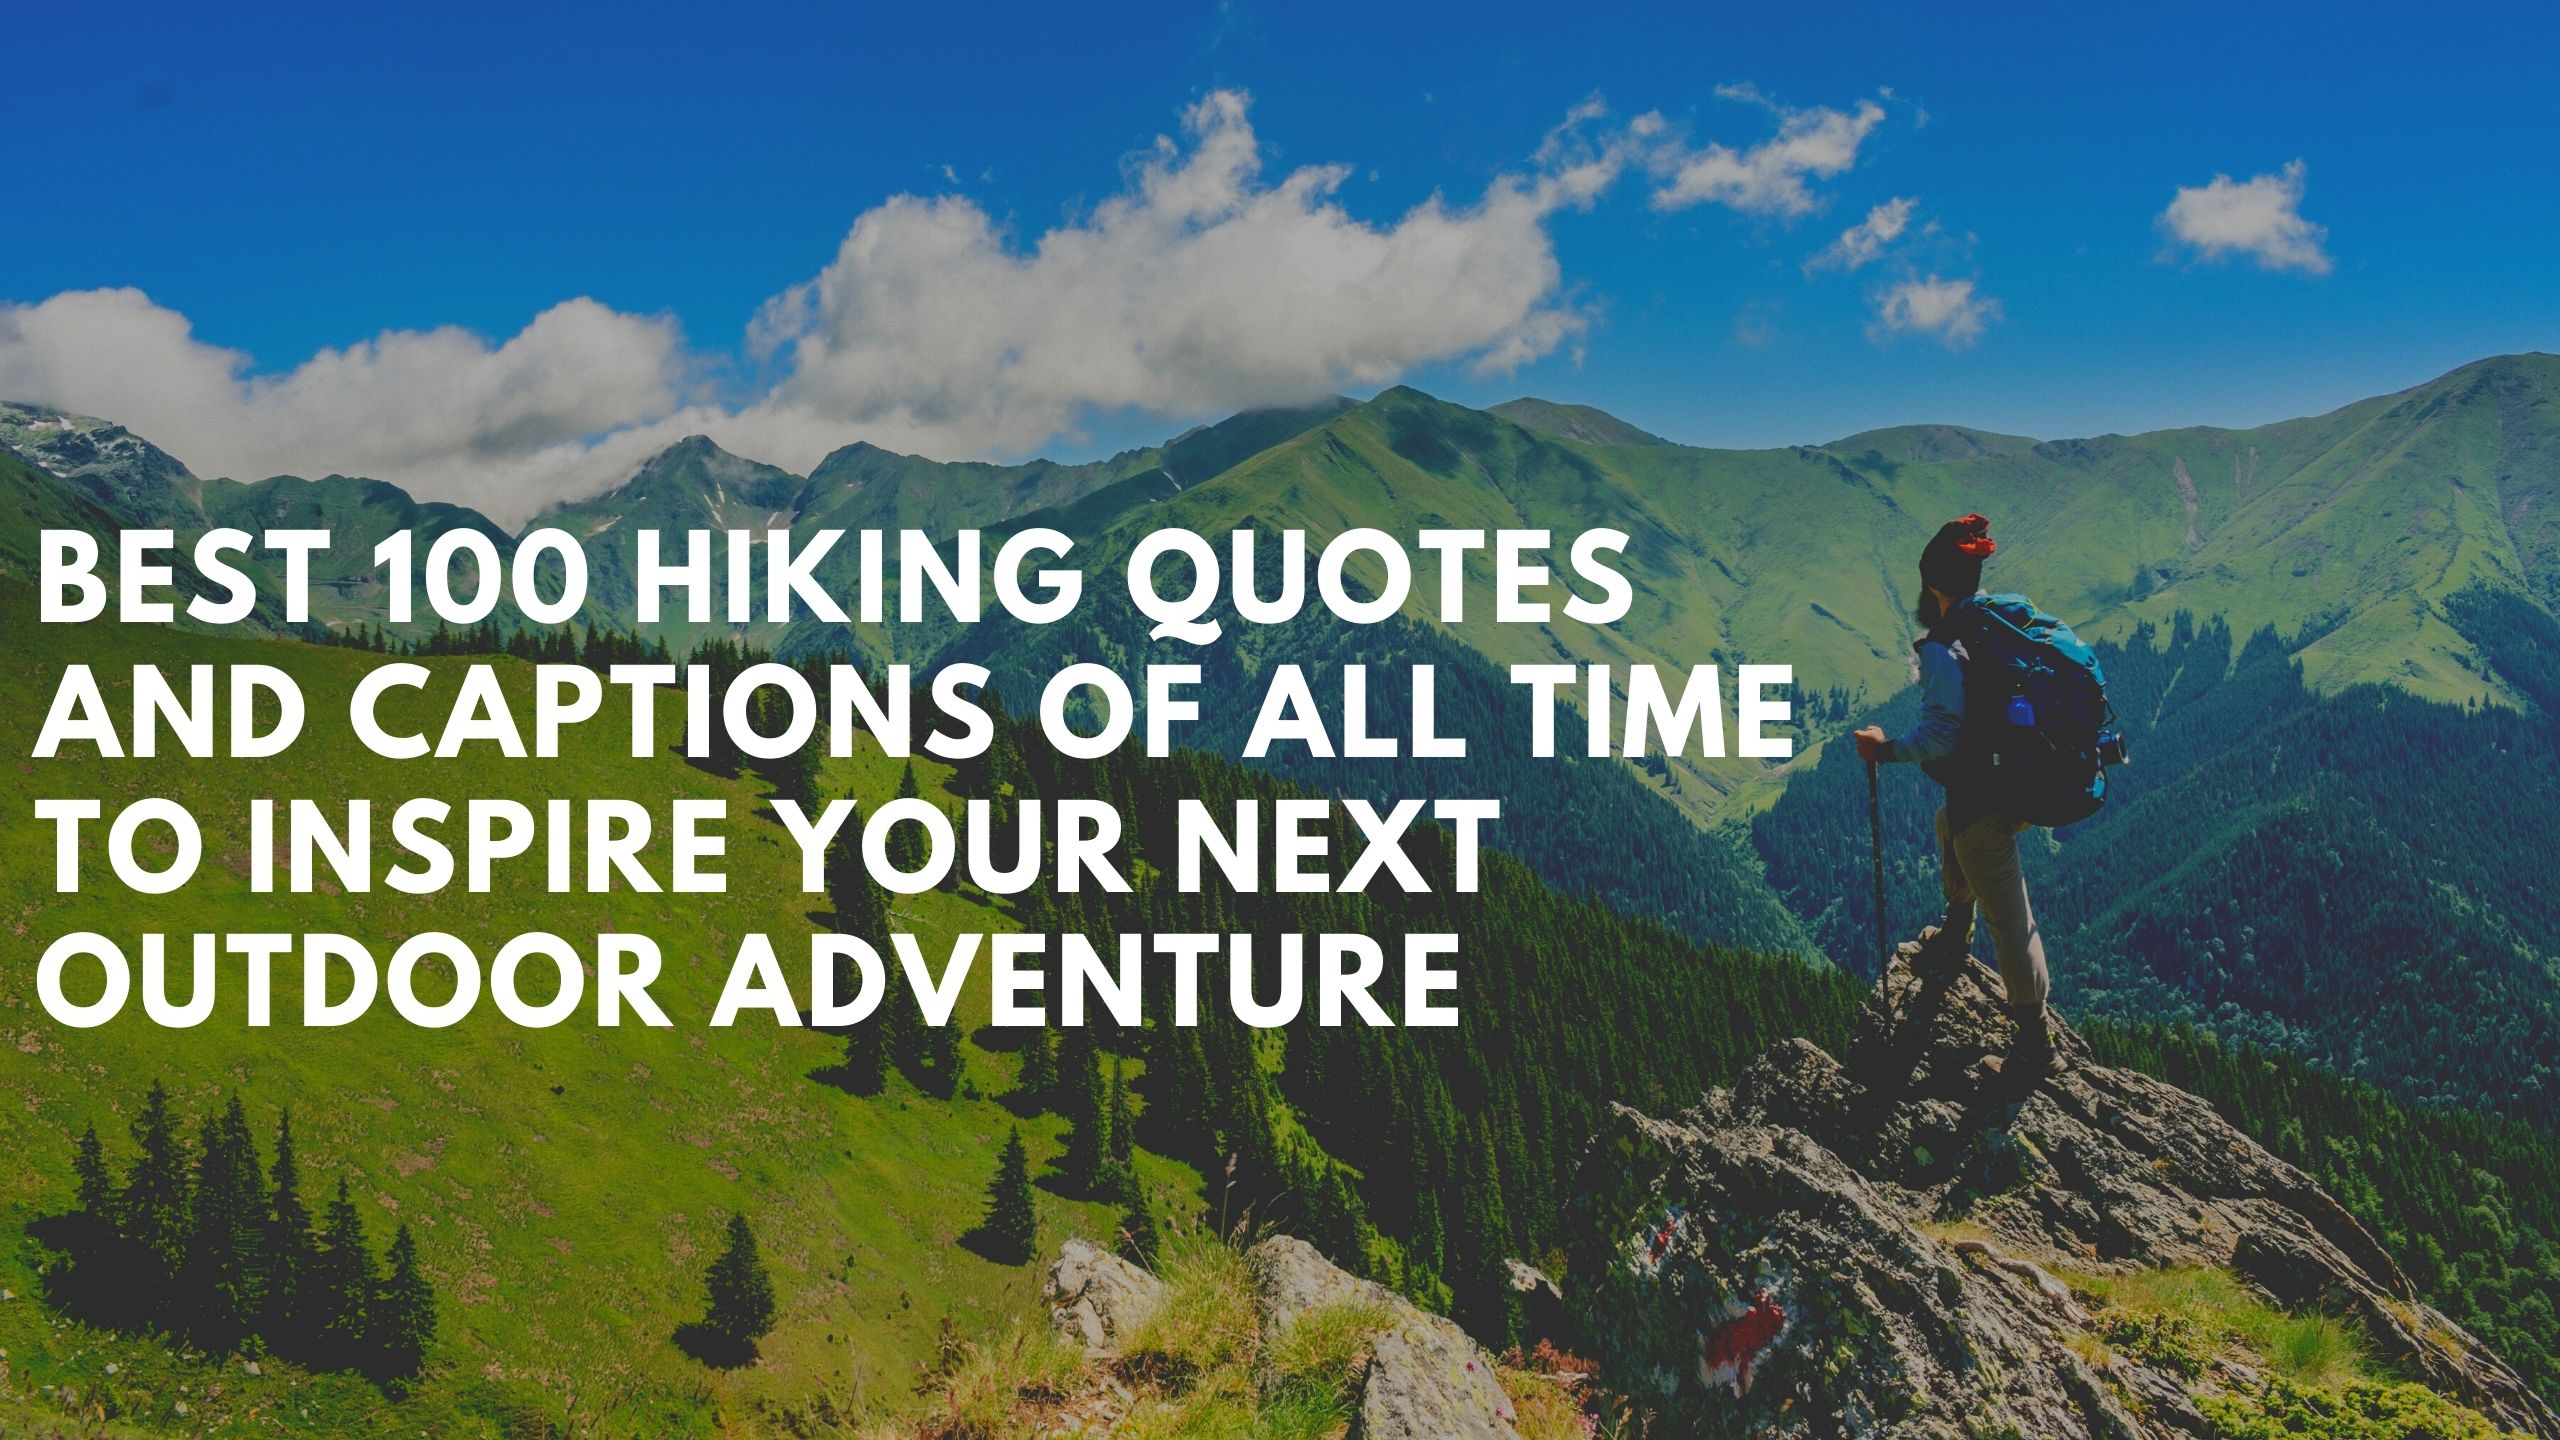 Best 100 hiking quotes